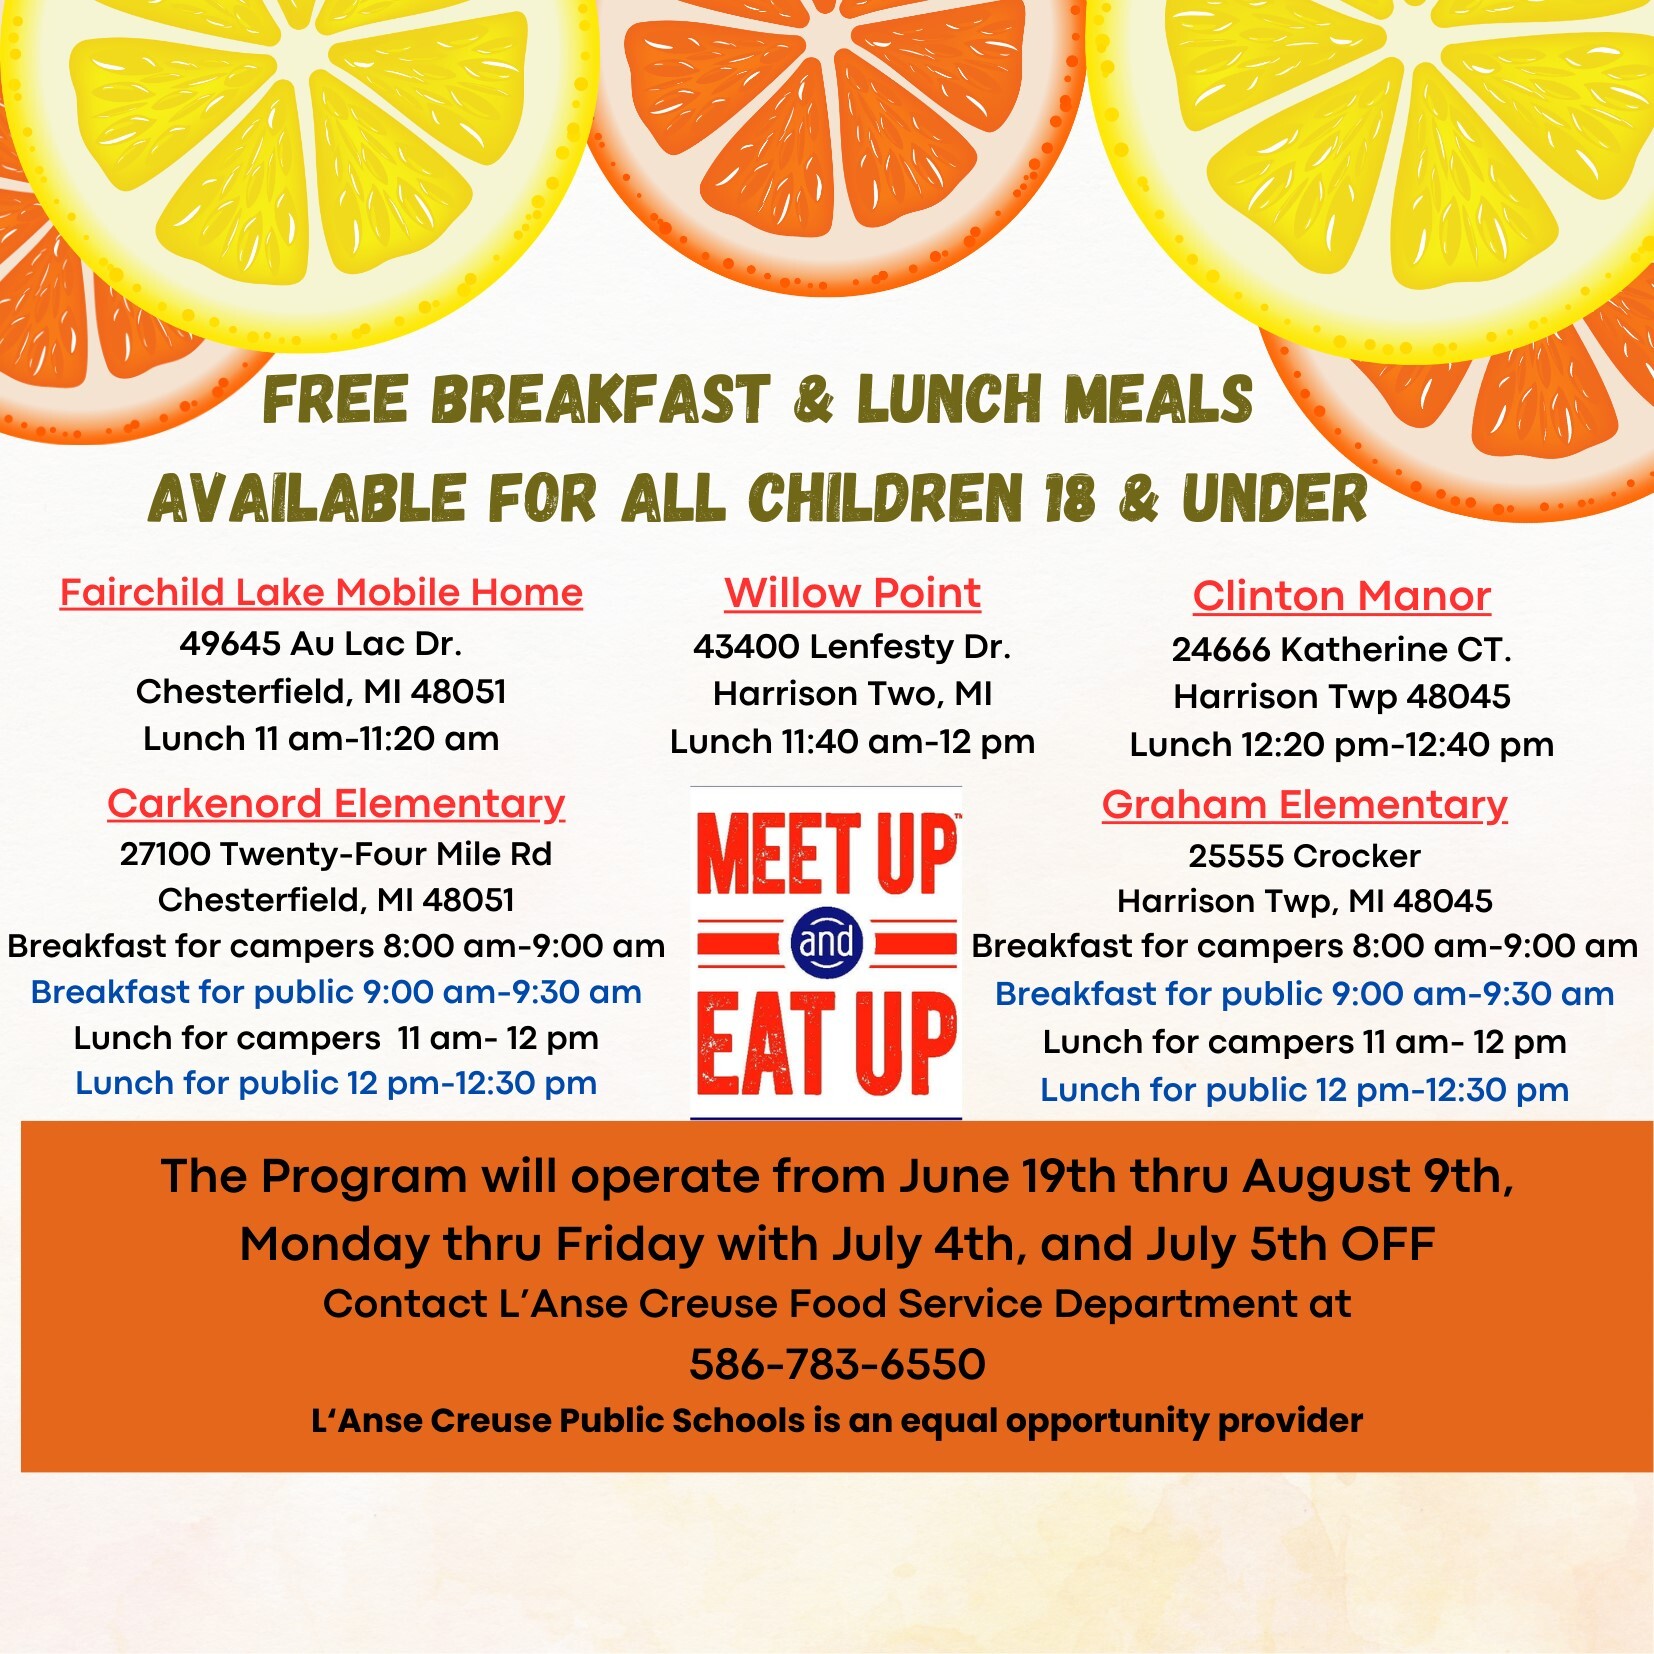 Free breakfast and lunch meals for all children 18 and under. The program will operate from June 19th to August 9th, Monday thru Friday with July 4th and July 5th off. Contact L'Anse Creuse Food Service Department at (586) 783-6550.